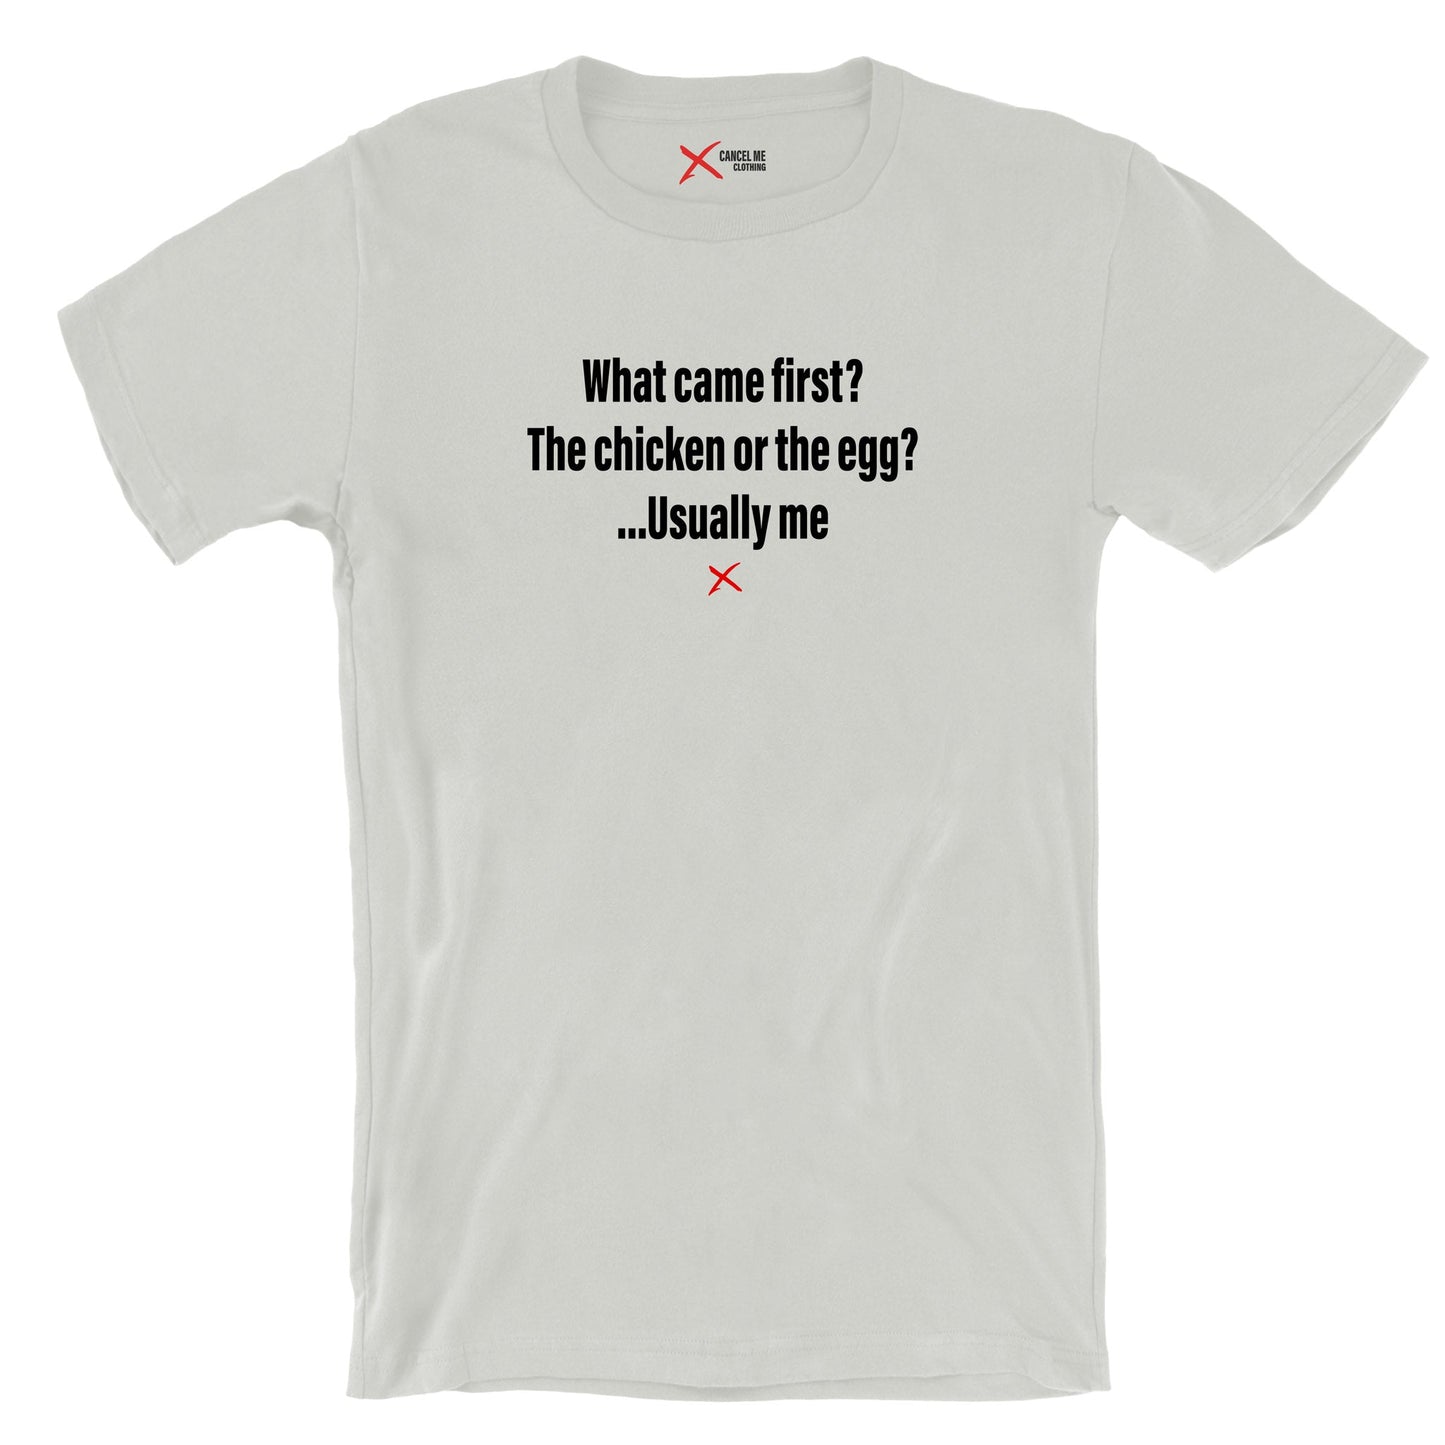 What came first? The chicken or the egg? ...Usually me - Shirt